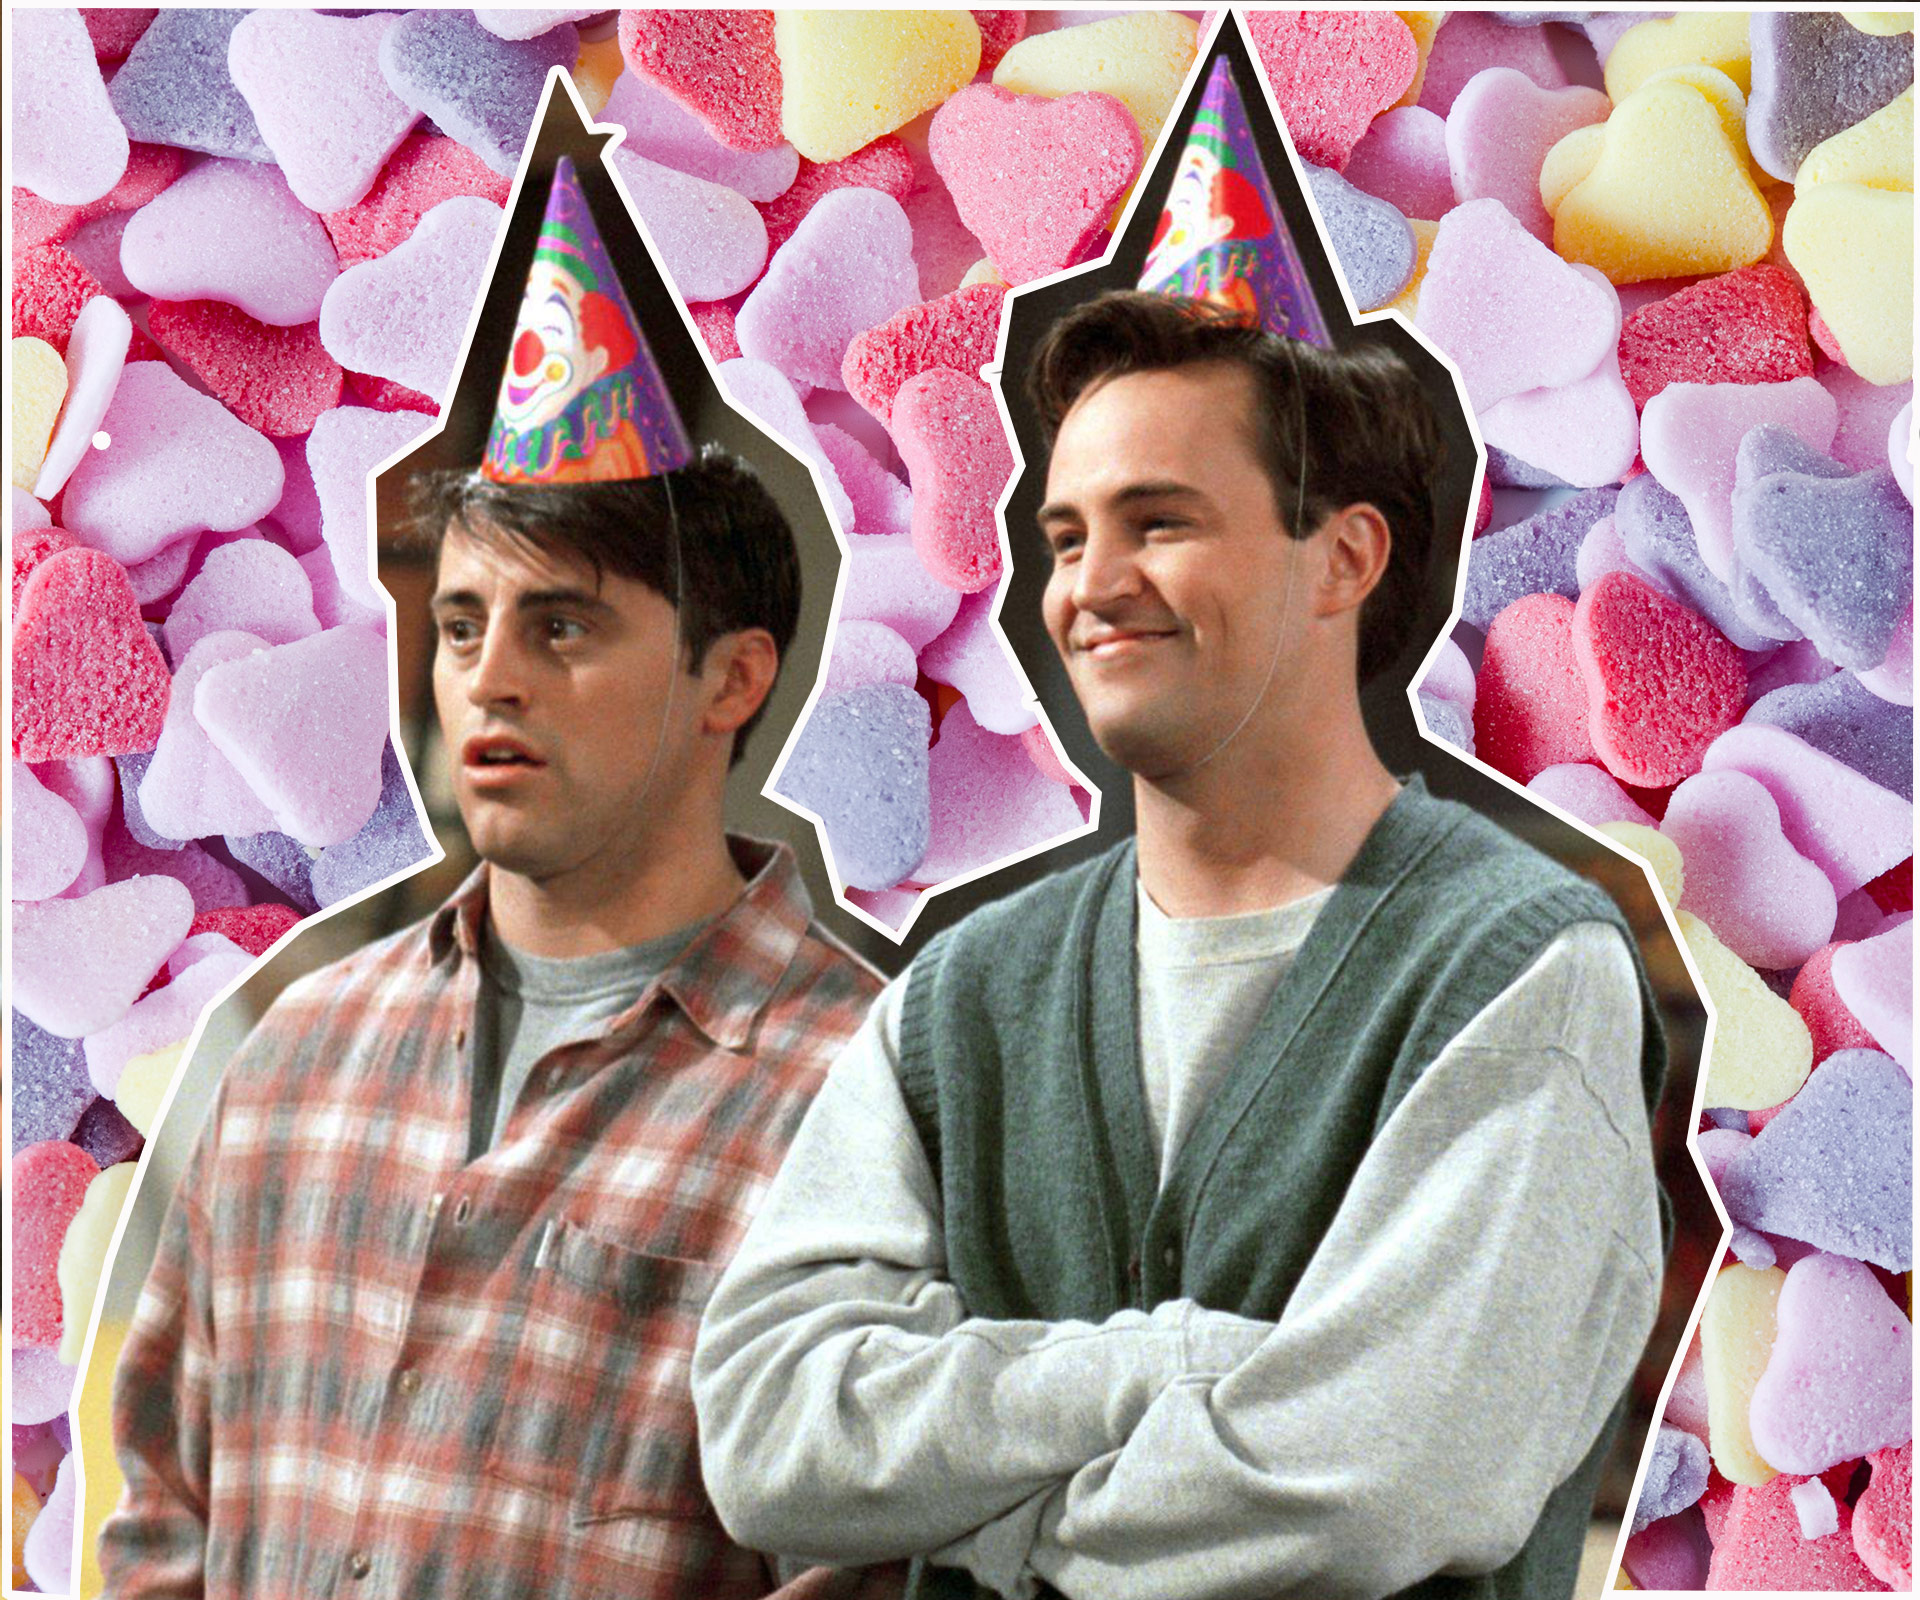 Joey and Chandler from Friends have the ultimate bromance.